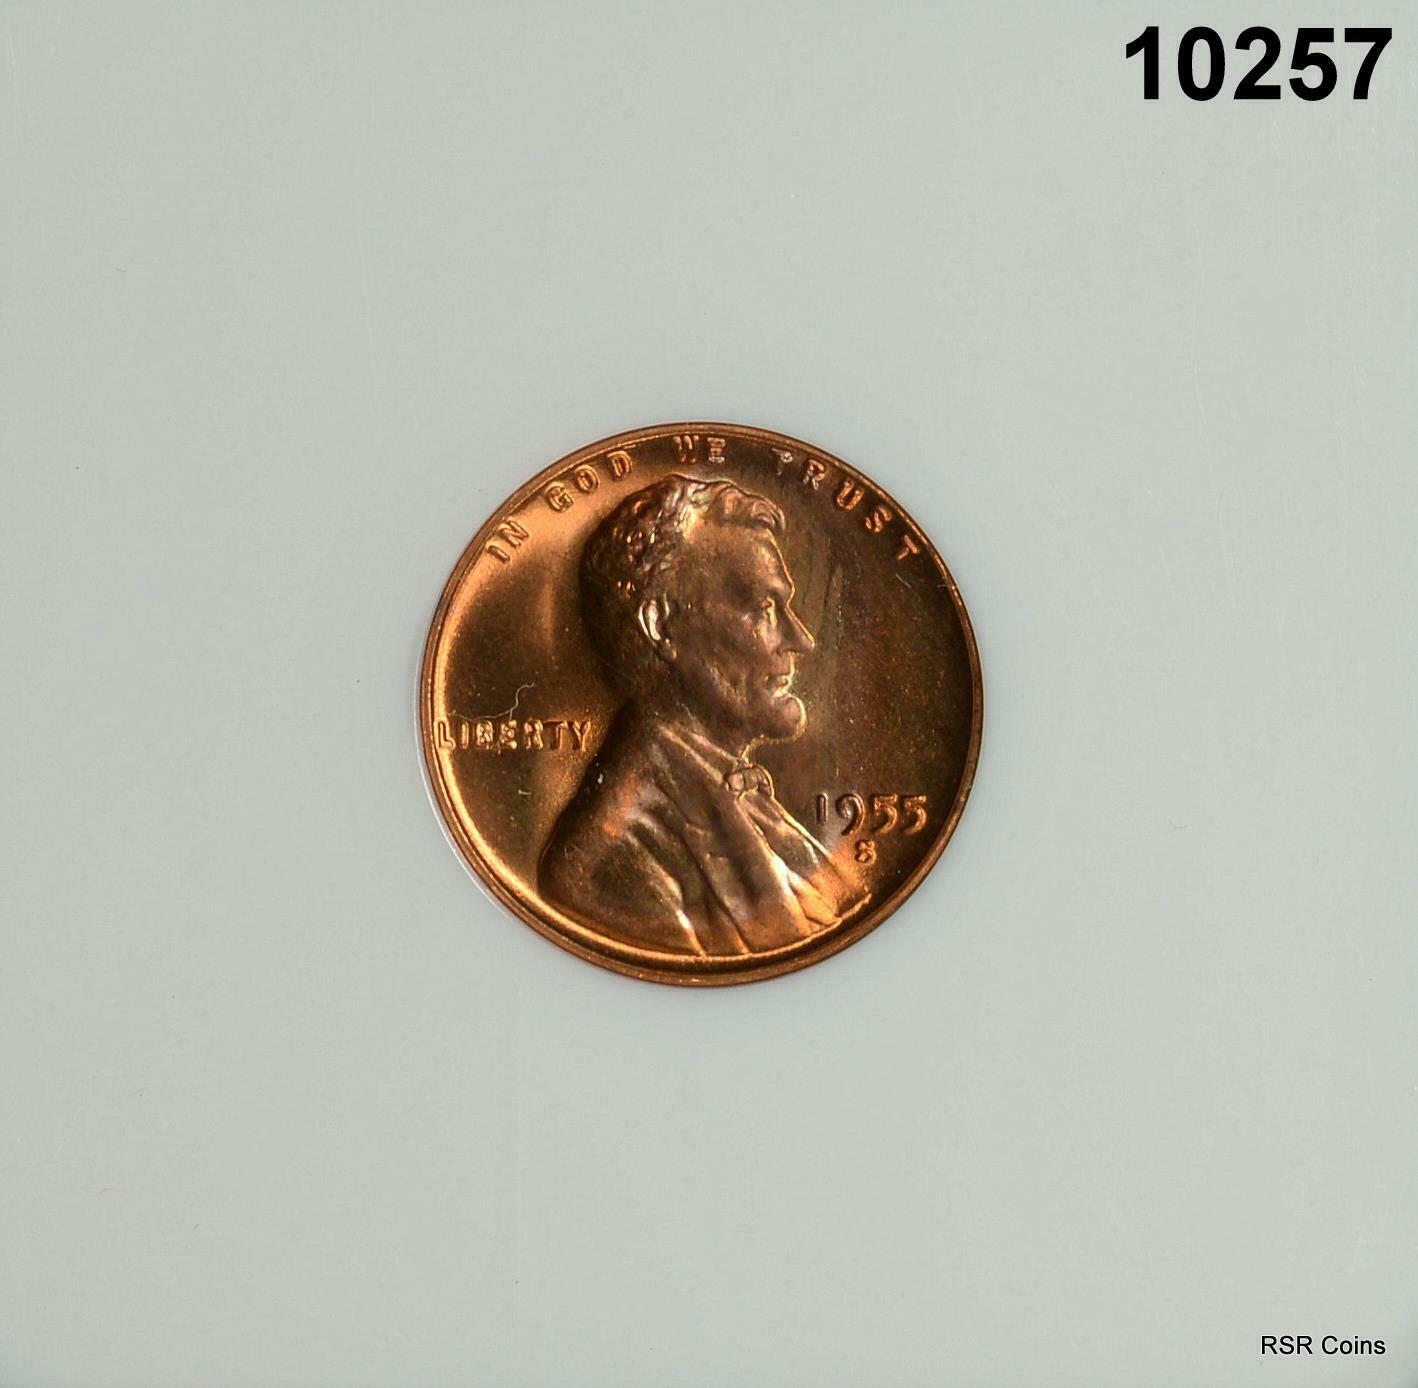 1955 S LINCOLN CENT NGC CERTIFIED MS66 RD SUNSET RED! #10257